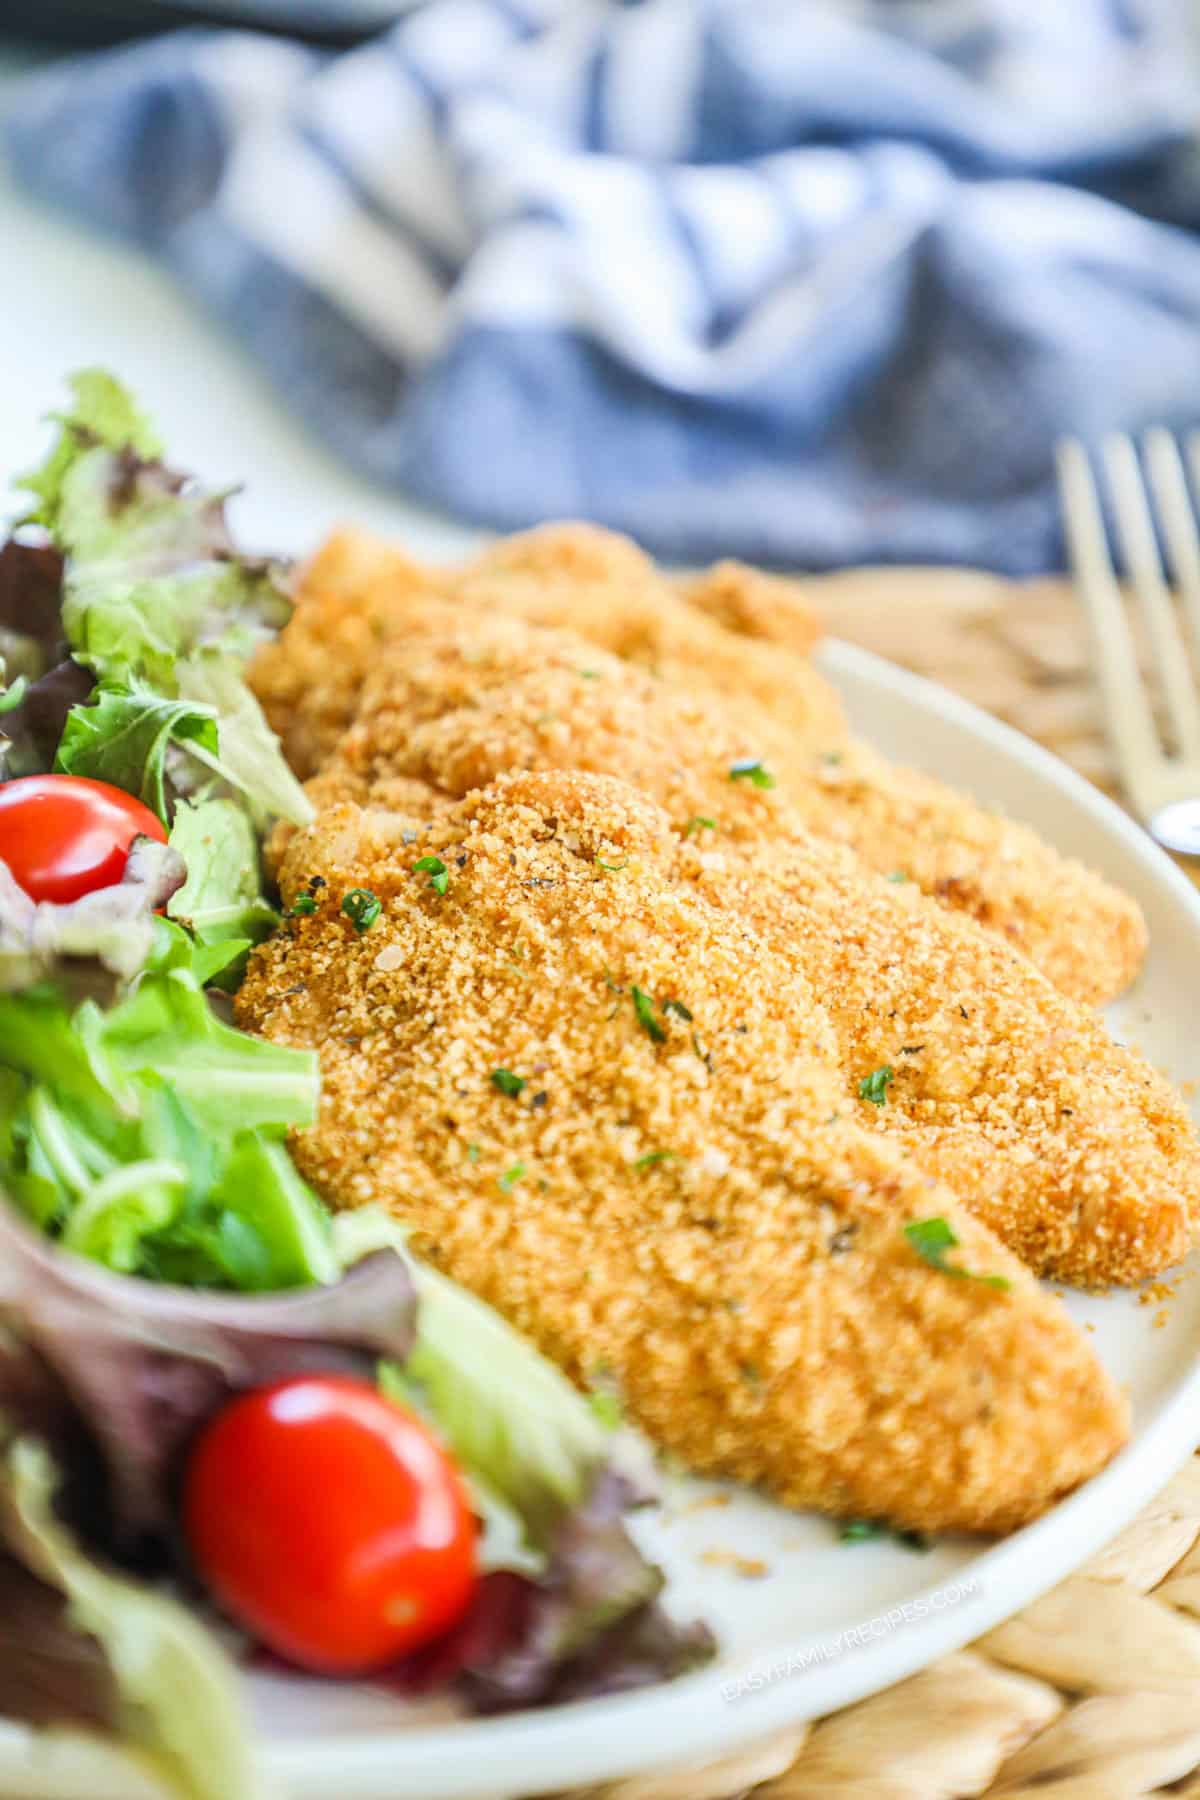 Plate with shake and bake breaded pork chops and salad on it.